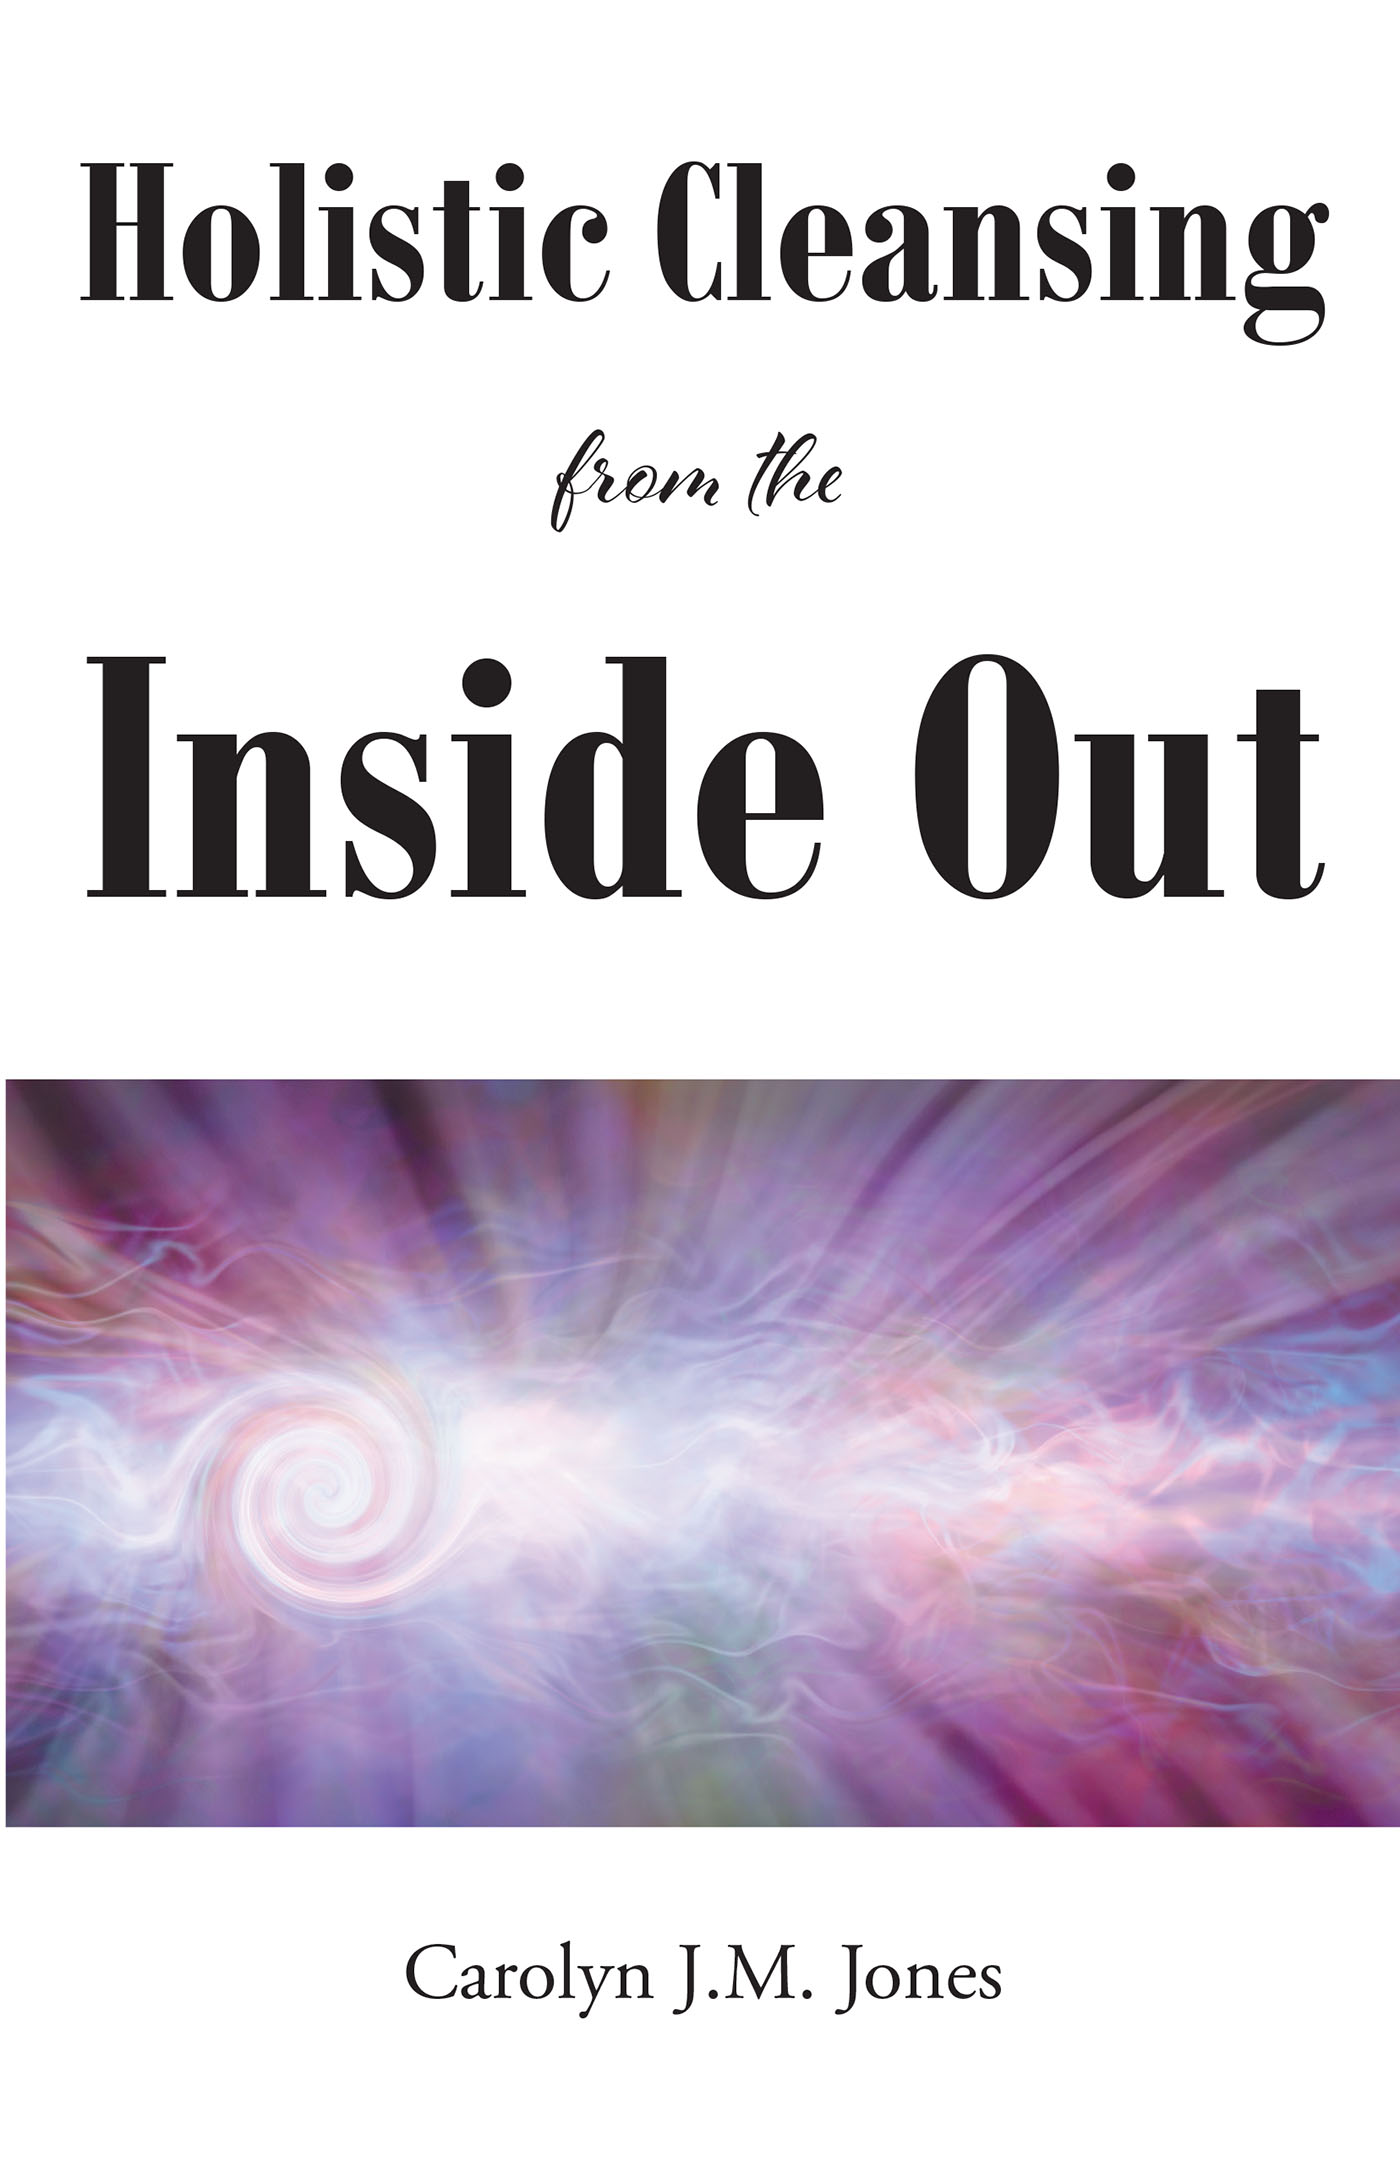 Carolyn J.M. Jones’s Newly Released “Holistic Cleansing from the Inside Out” is an Encouraging Approach to Healing Physically and Spiritually